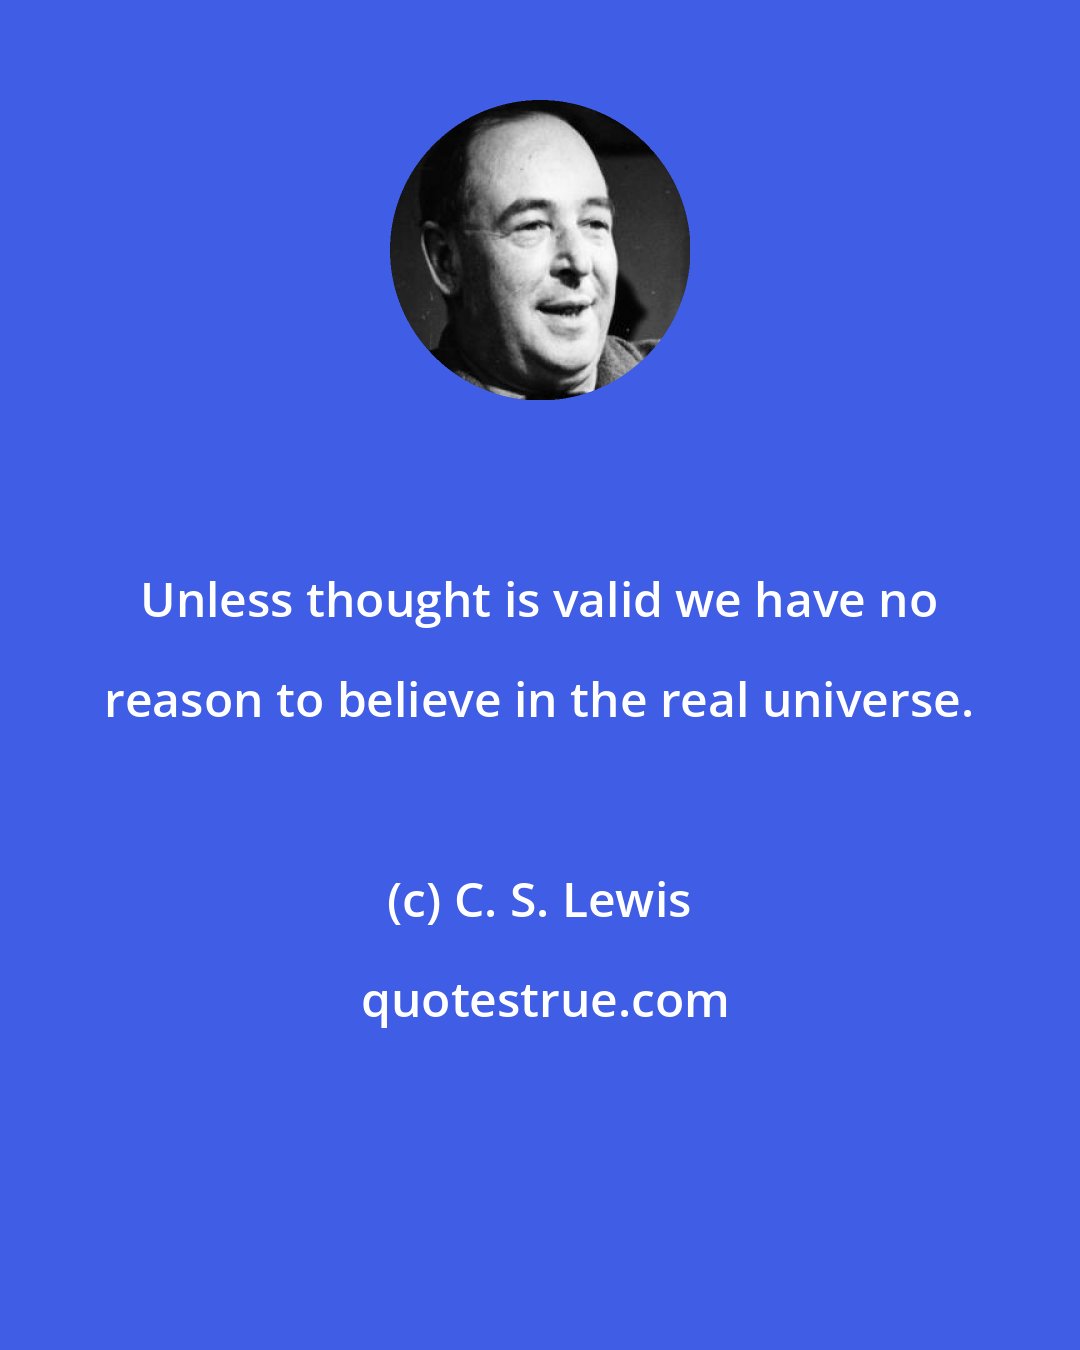 C. S. Lewis: Unless thought is valid we have no reason to believe in the real universe.